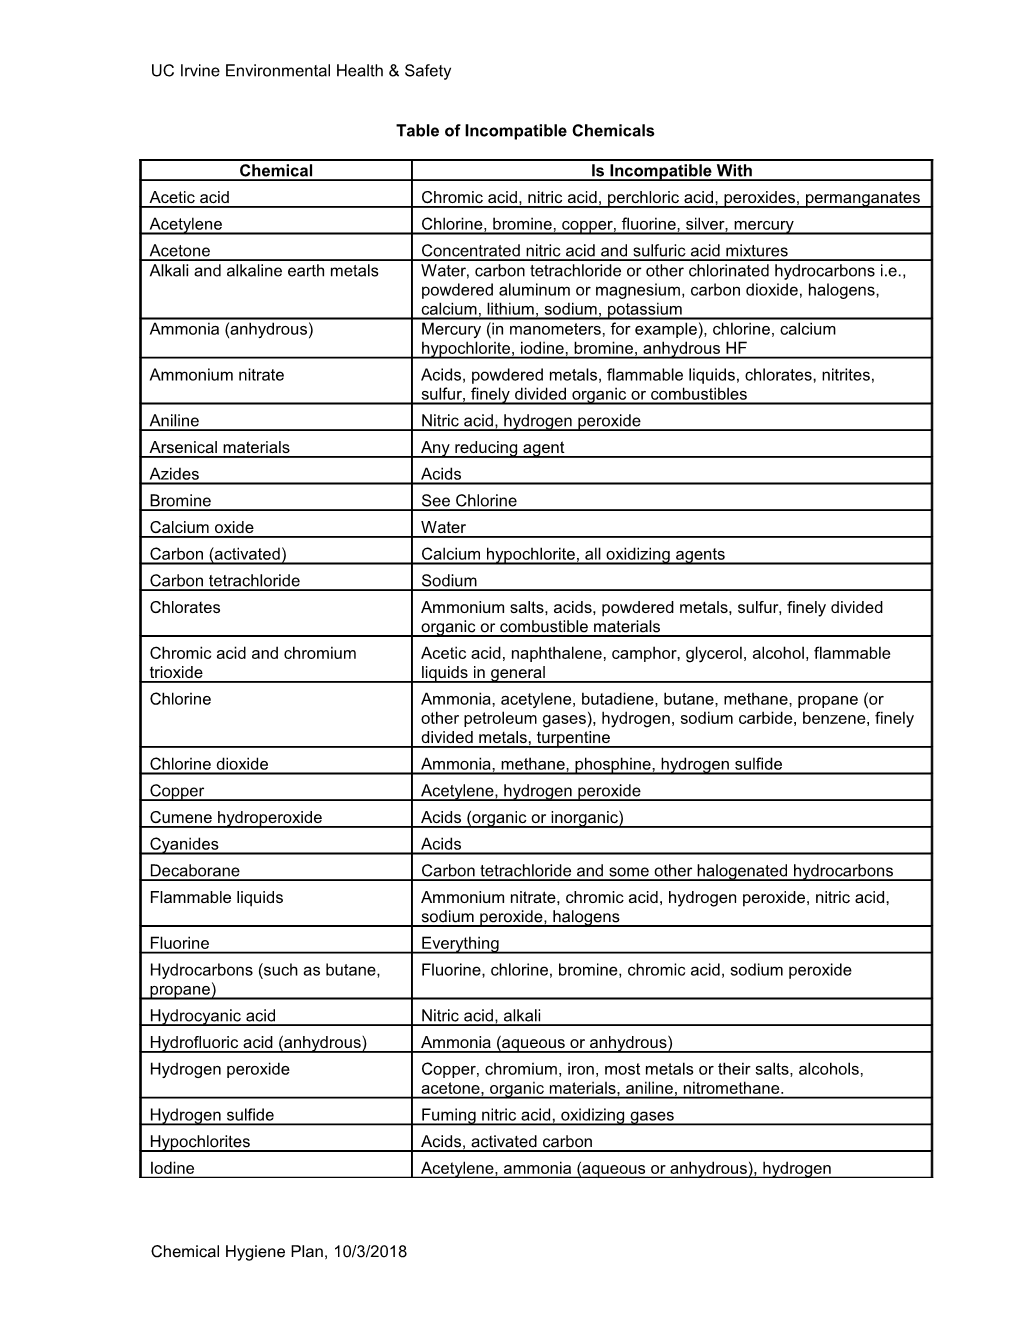 Examples of Incompatible Chemicals